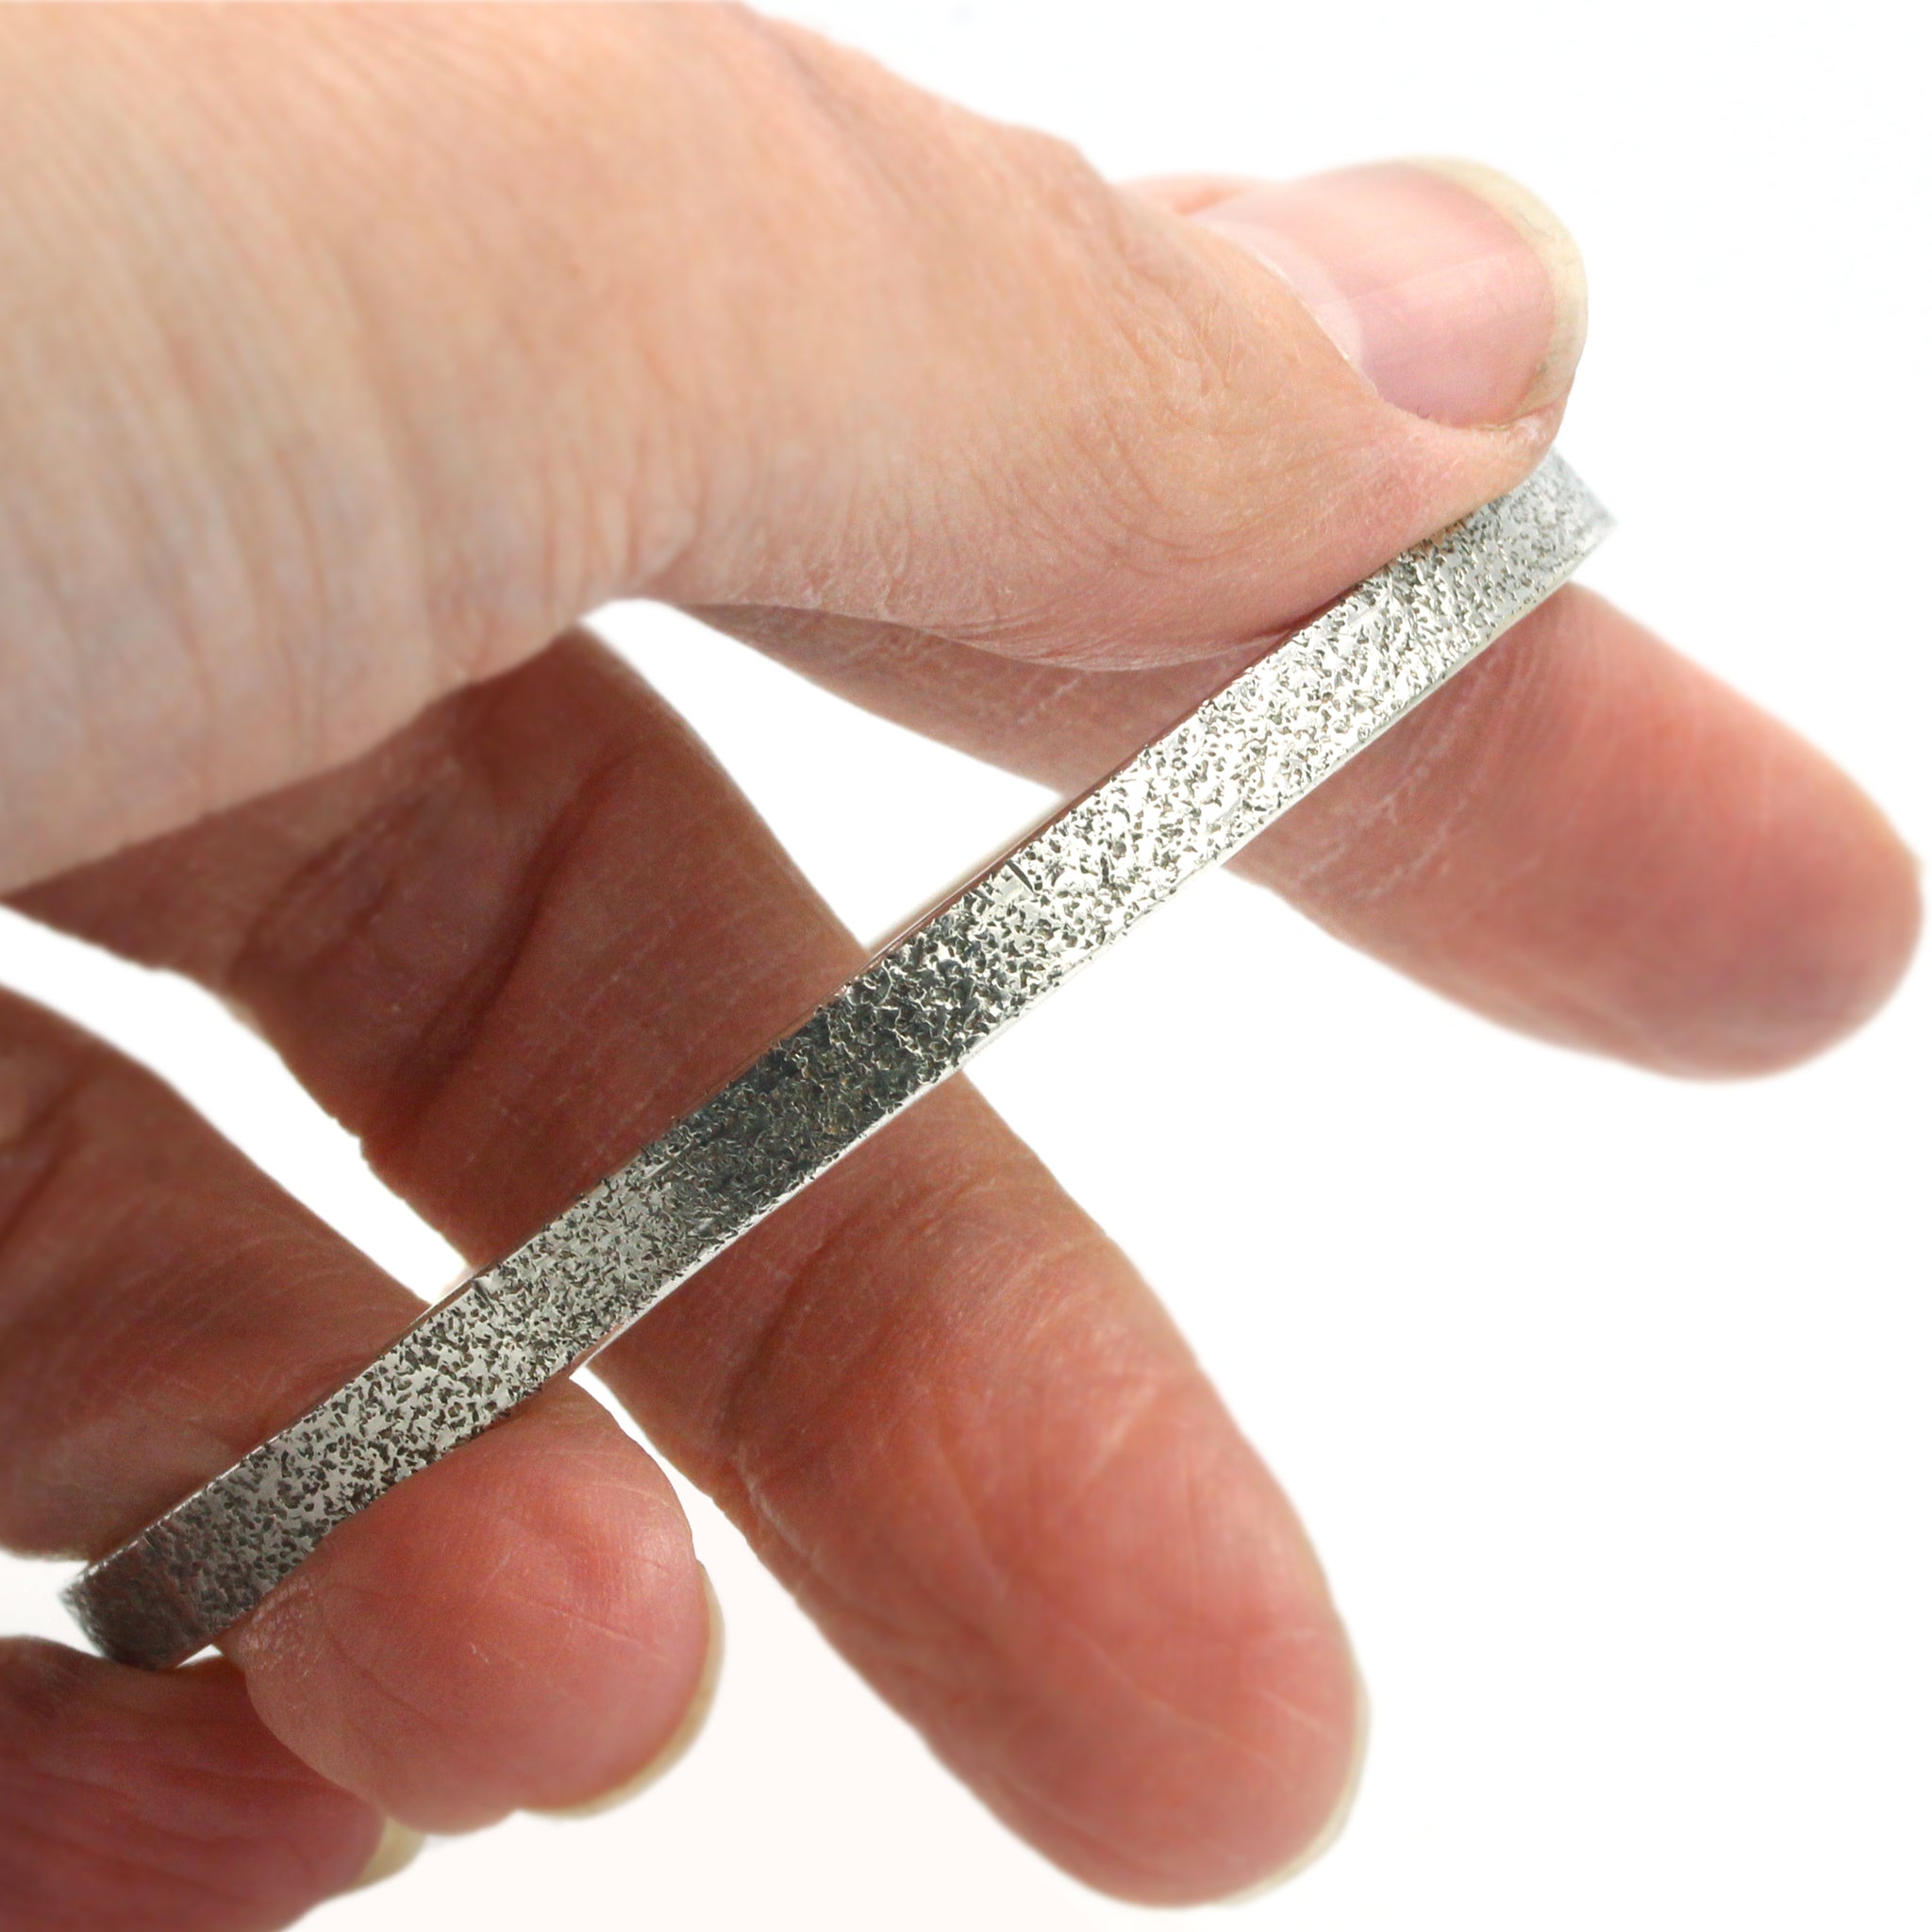 Sand textured silver bangle, handmade in 100% recycled silver